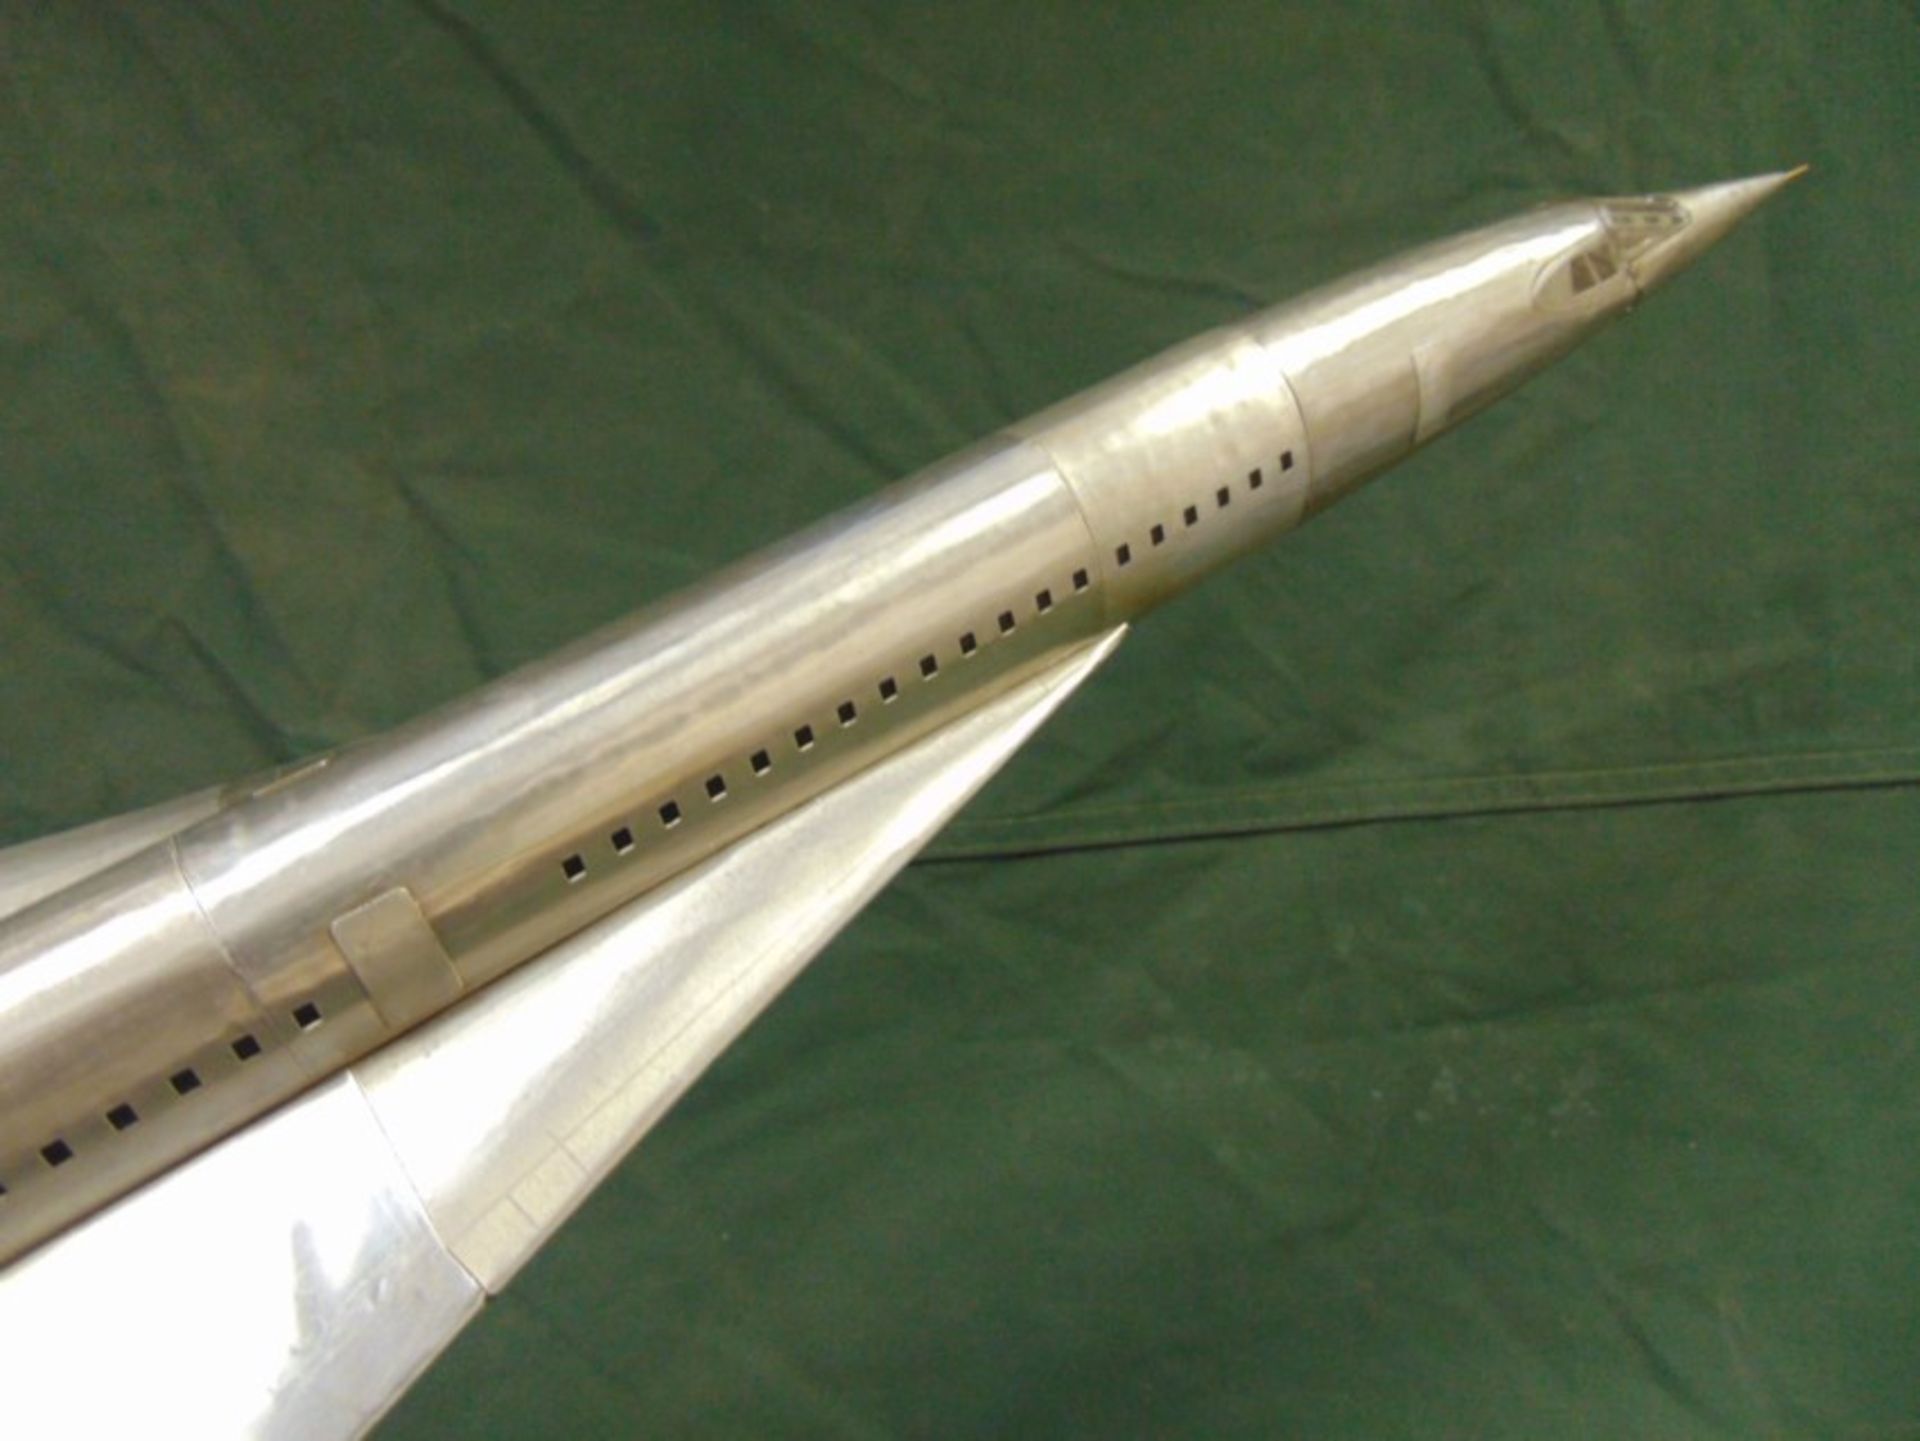 NEW JUST LANDED Large Aluminium Concorde Model - Image 5 of 14